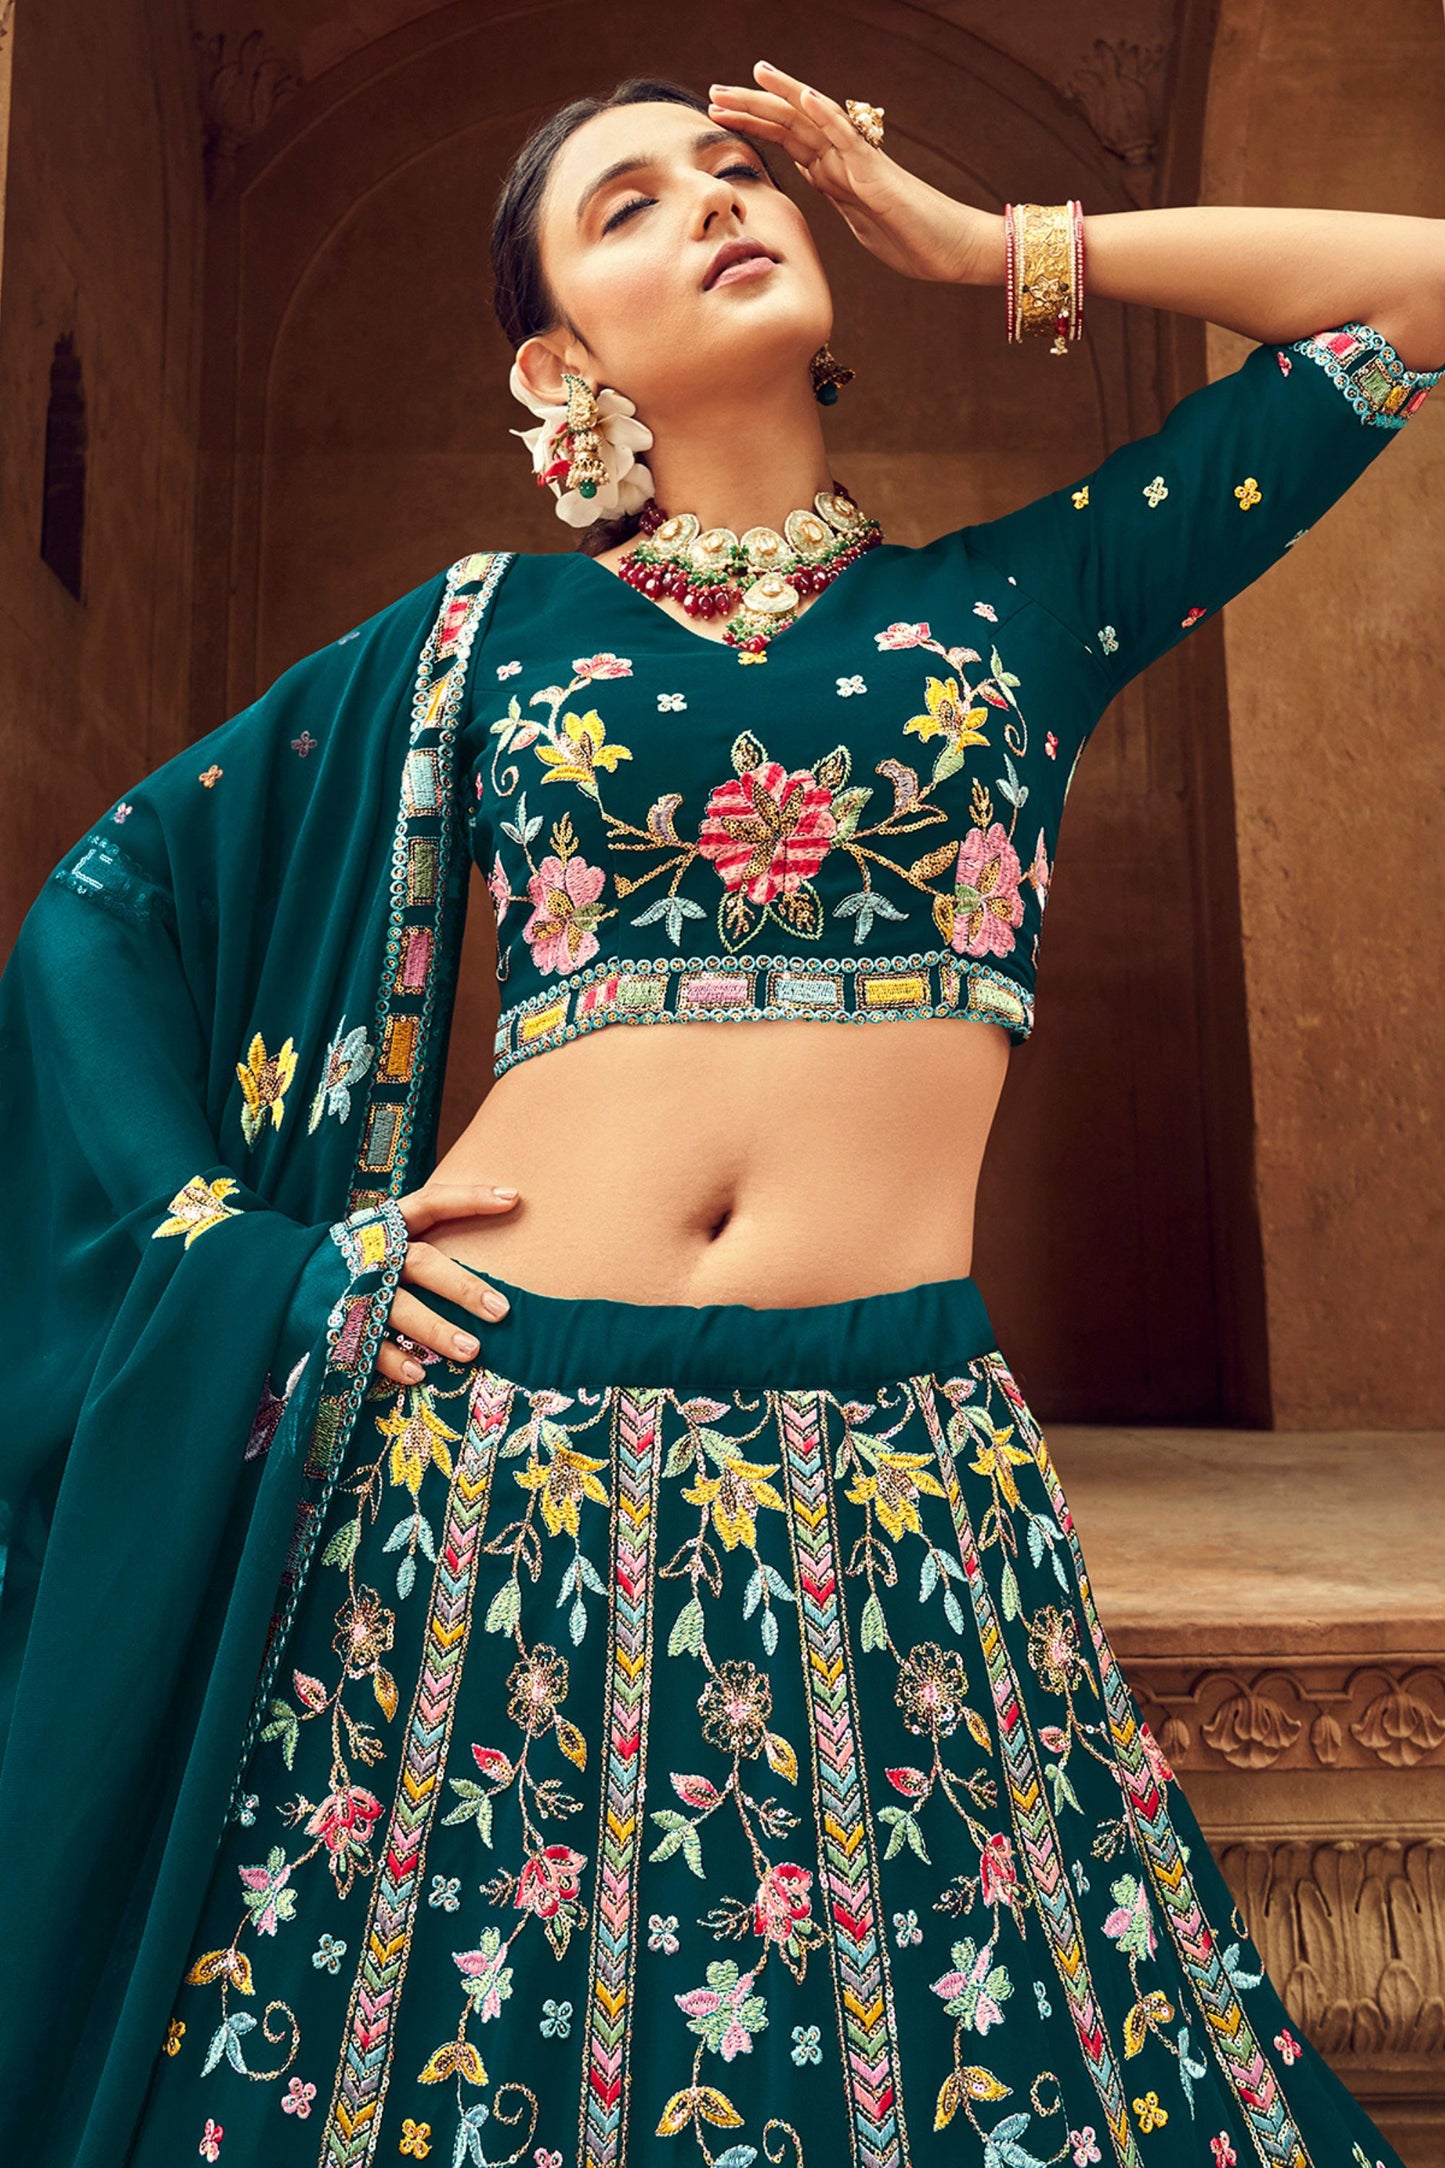 Teal Georgette Floral Embroidered Lehenga Choli For Indian Festivals & Weddings - Sequence Embroidery Work, Thread Work